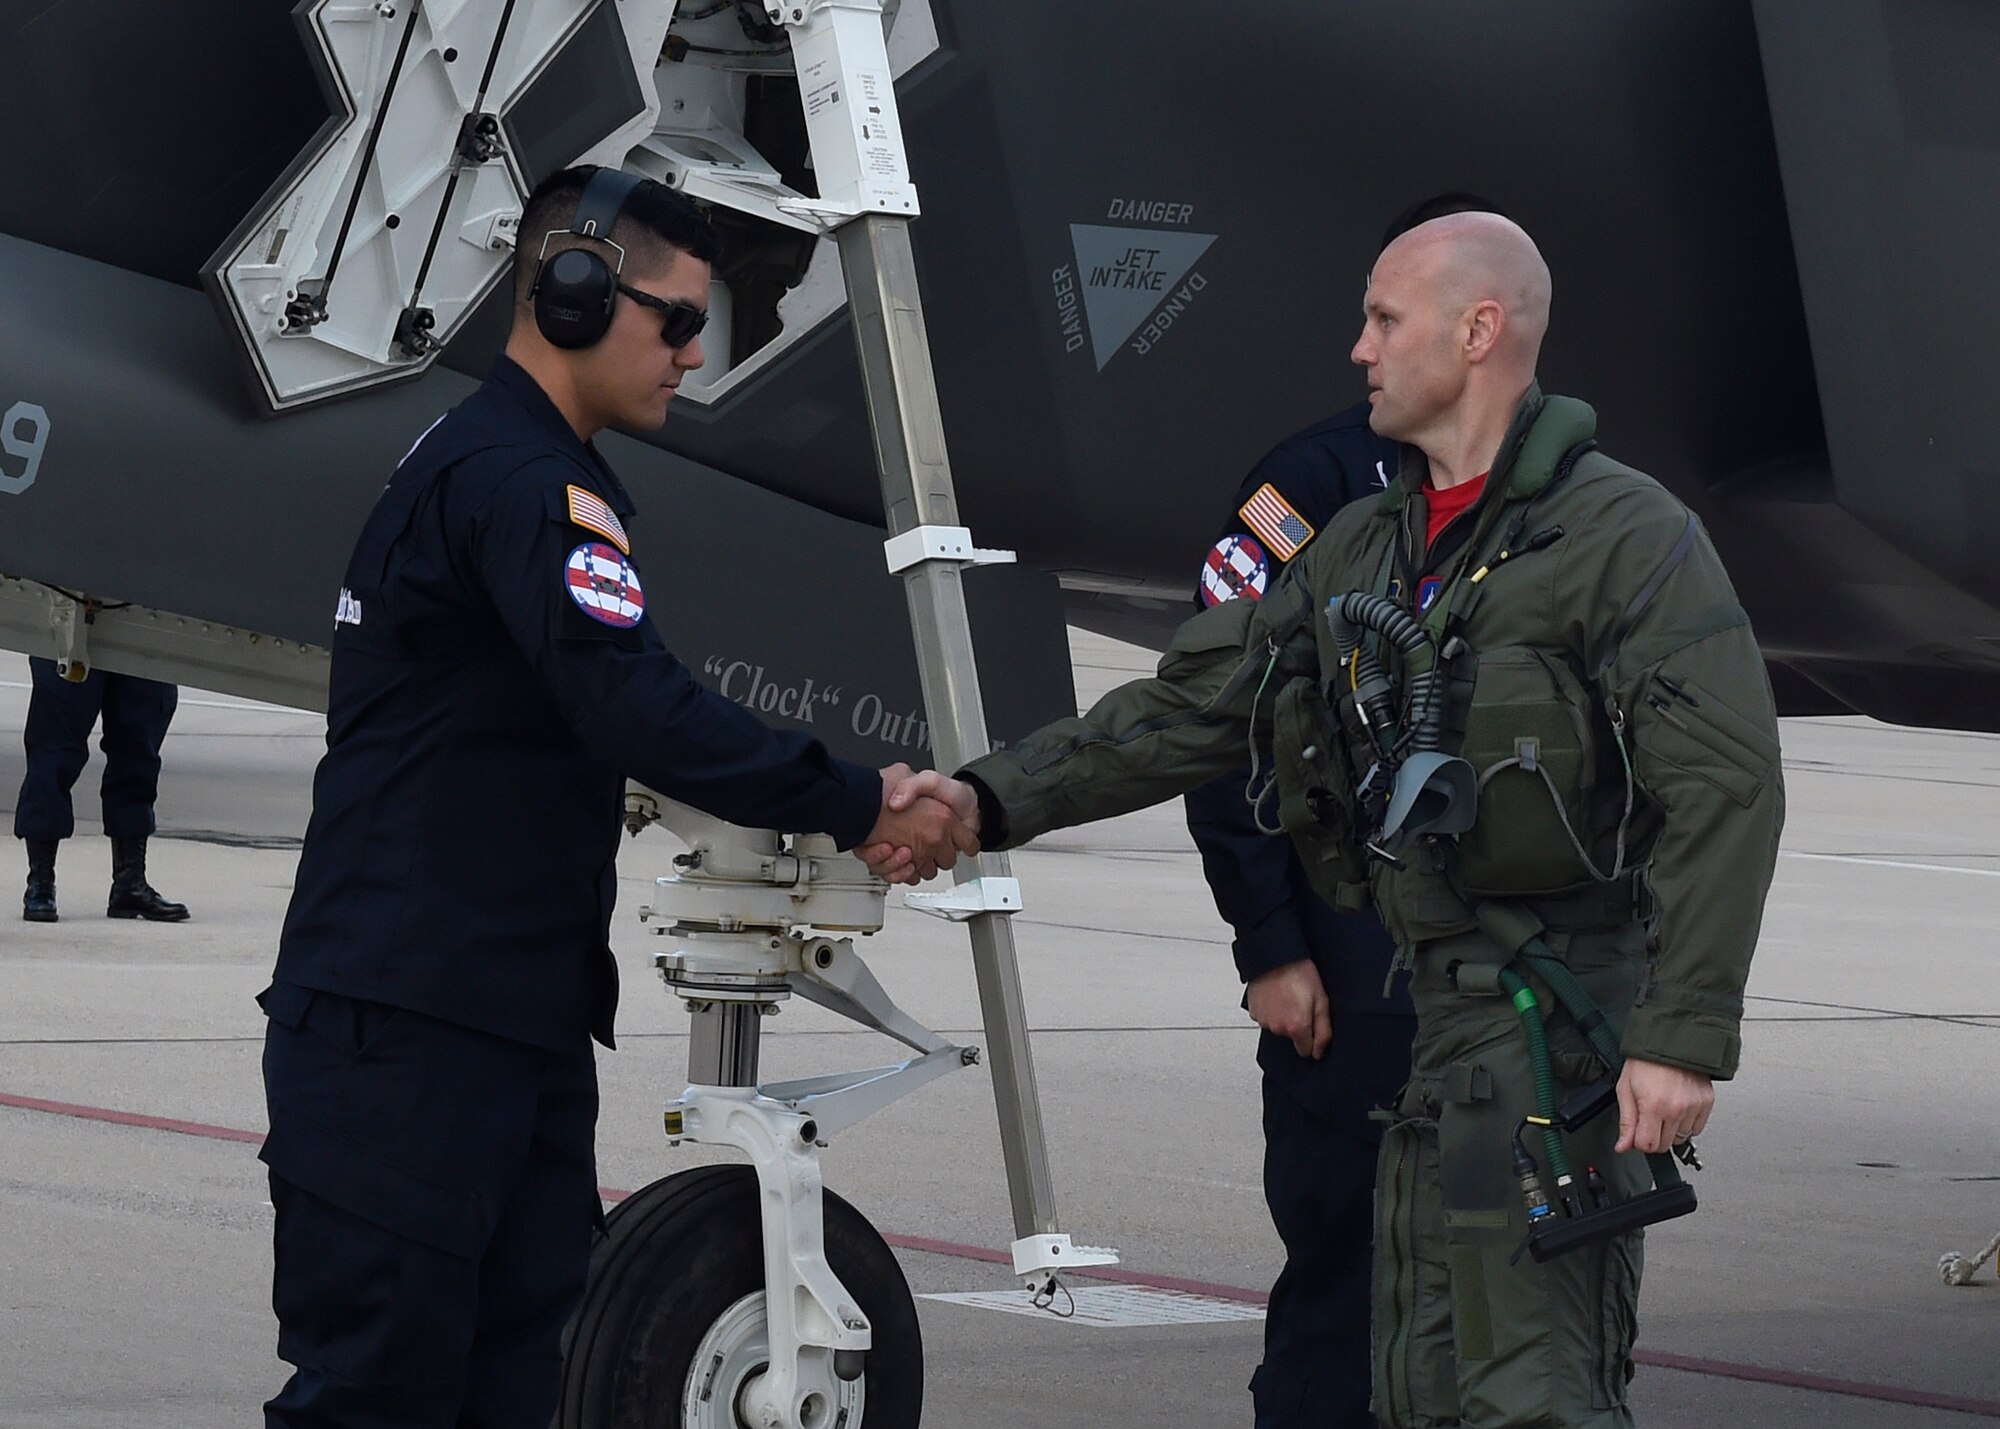 Maj. Will Andreotta, 61st Fighter Squadron heritage flight pilot, shakes hands with Staff Sgt. Jeremy Miller, 61st FS heritage flight team avionics, prior to flying during the Heritage Flight Training and Certification Course Feb. 12, 2017, at Davis-Monthan Air Force Base, Ariz. Heritage and demonstration teams need to be certified annually to participate in open houses and air shows worldwide. (U.S. Air Force photo by Senior Airman James Hensley)   